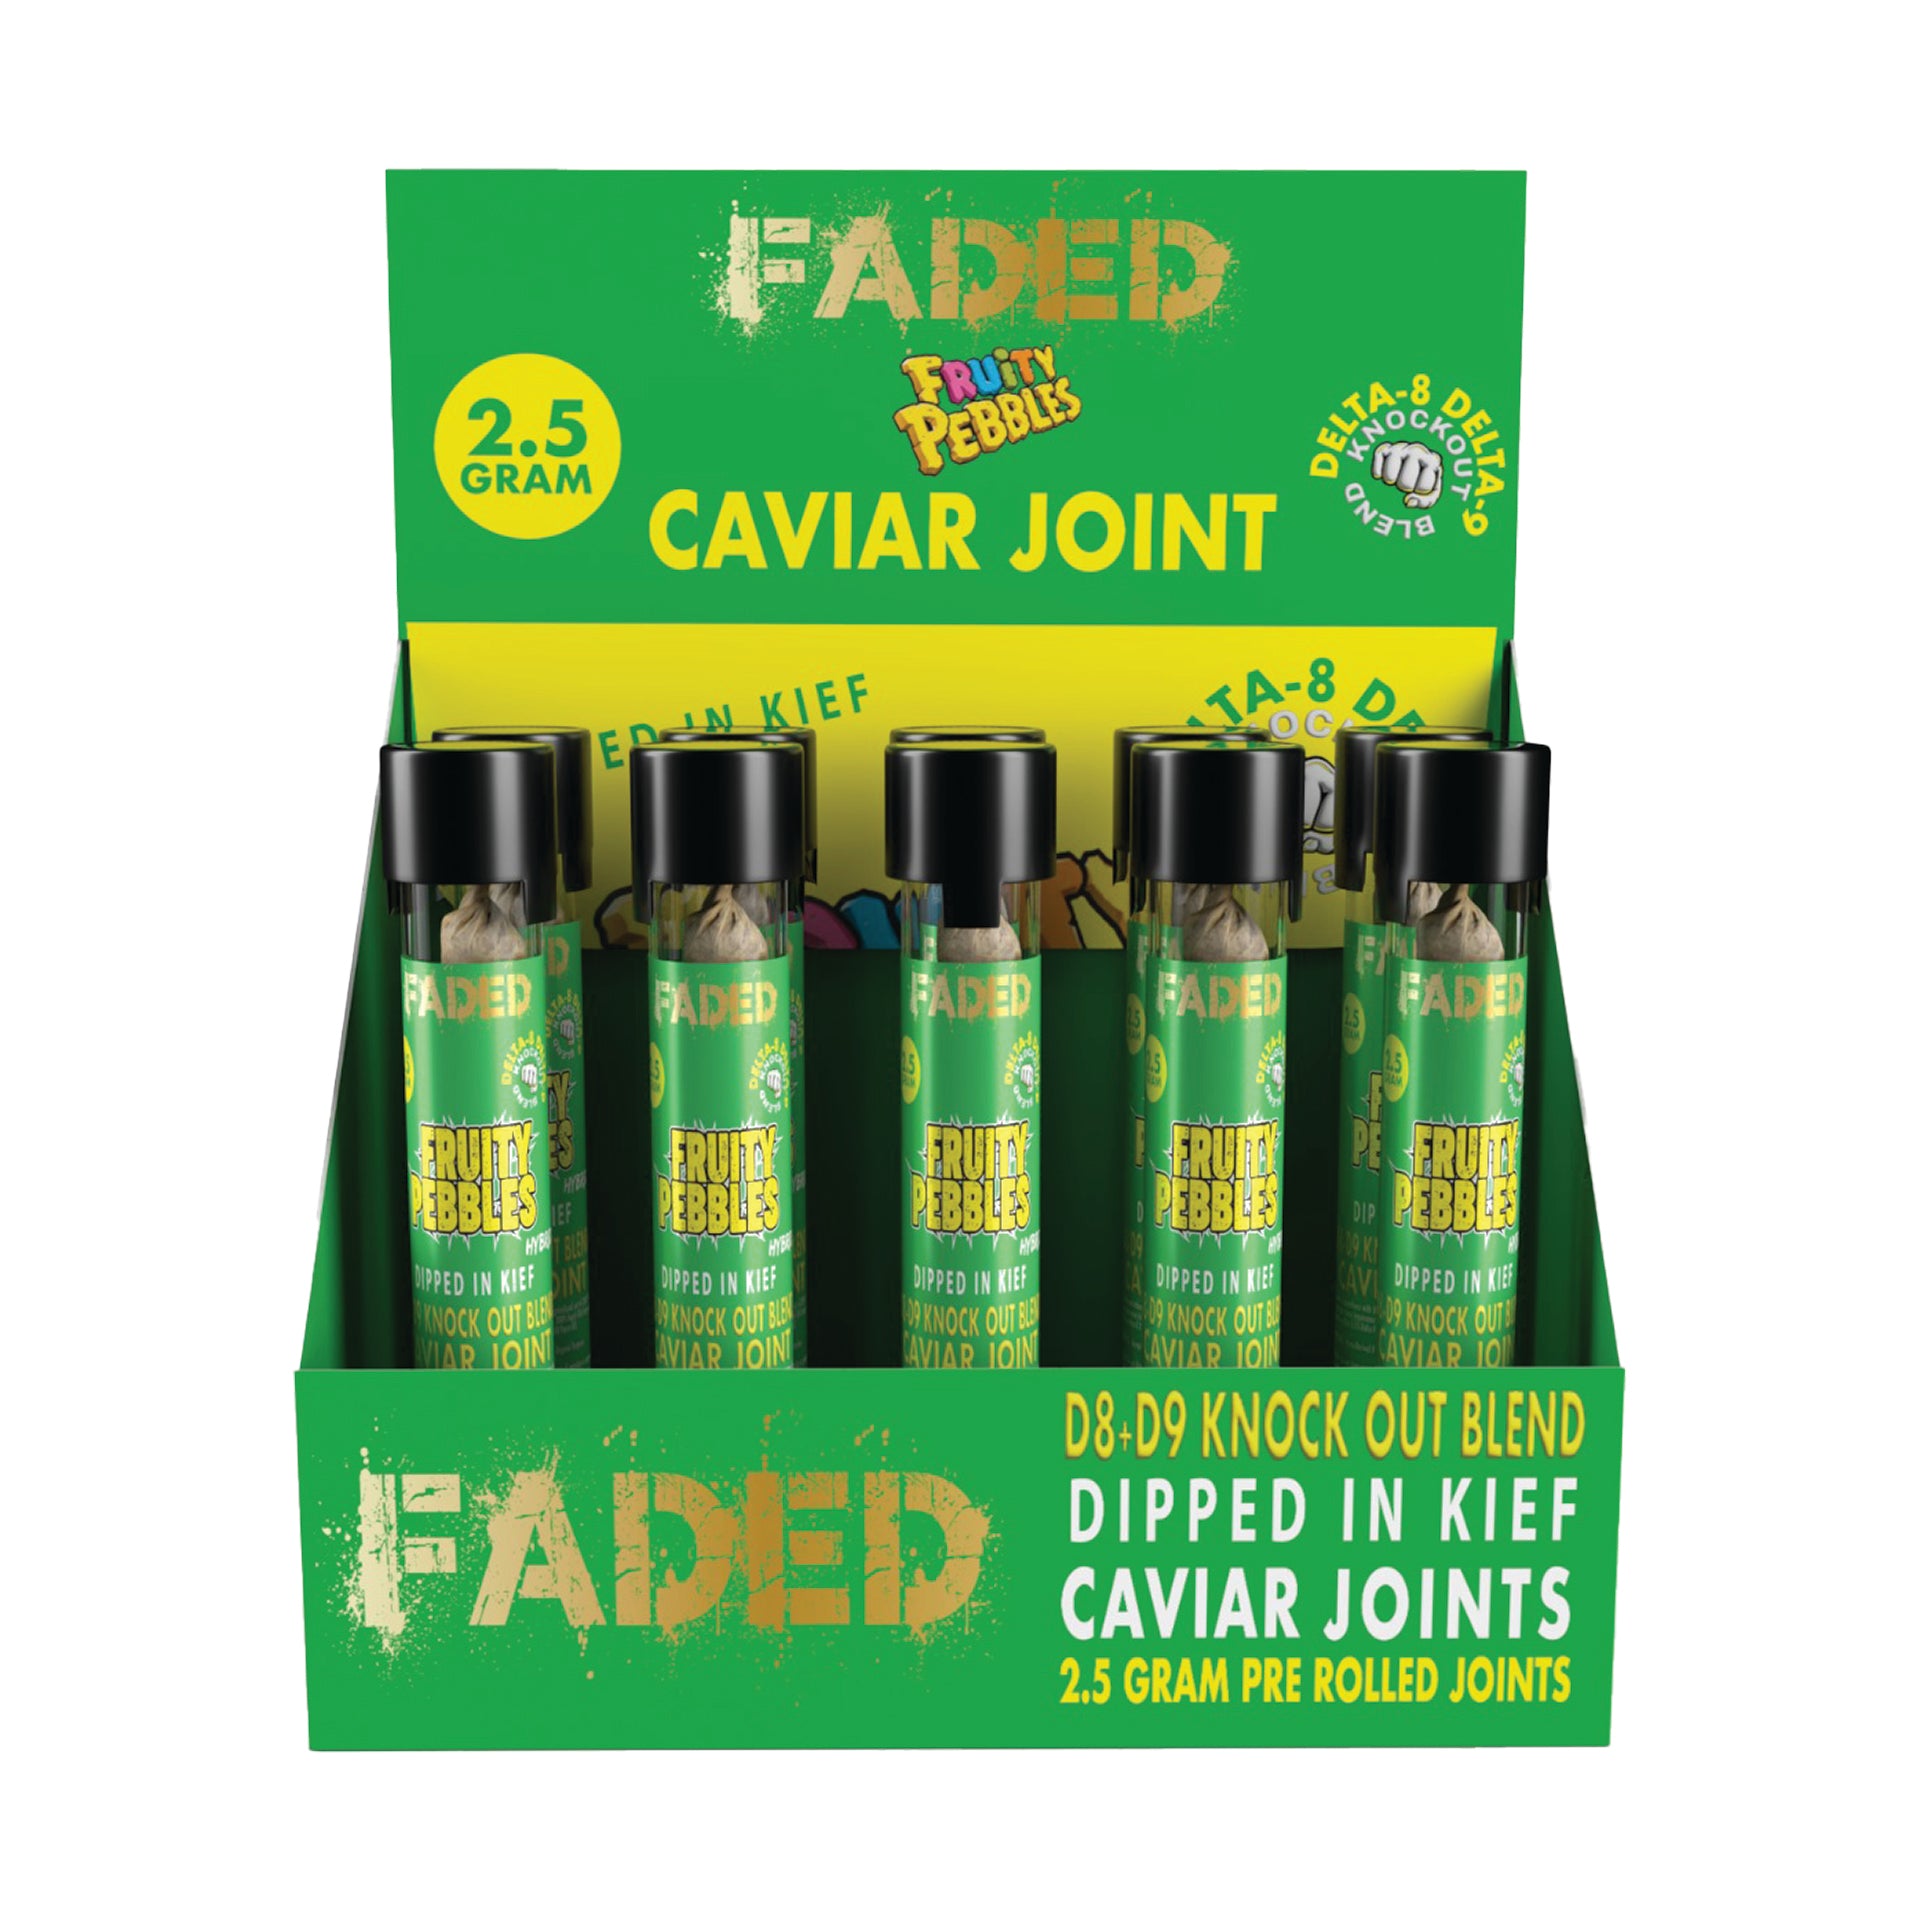 FADED DELTA-8+DELTA-9 KNOCKOUT BLEND FRUITY PEBBLES CAVIAR JOINTS 2500MG